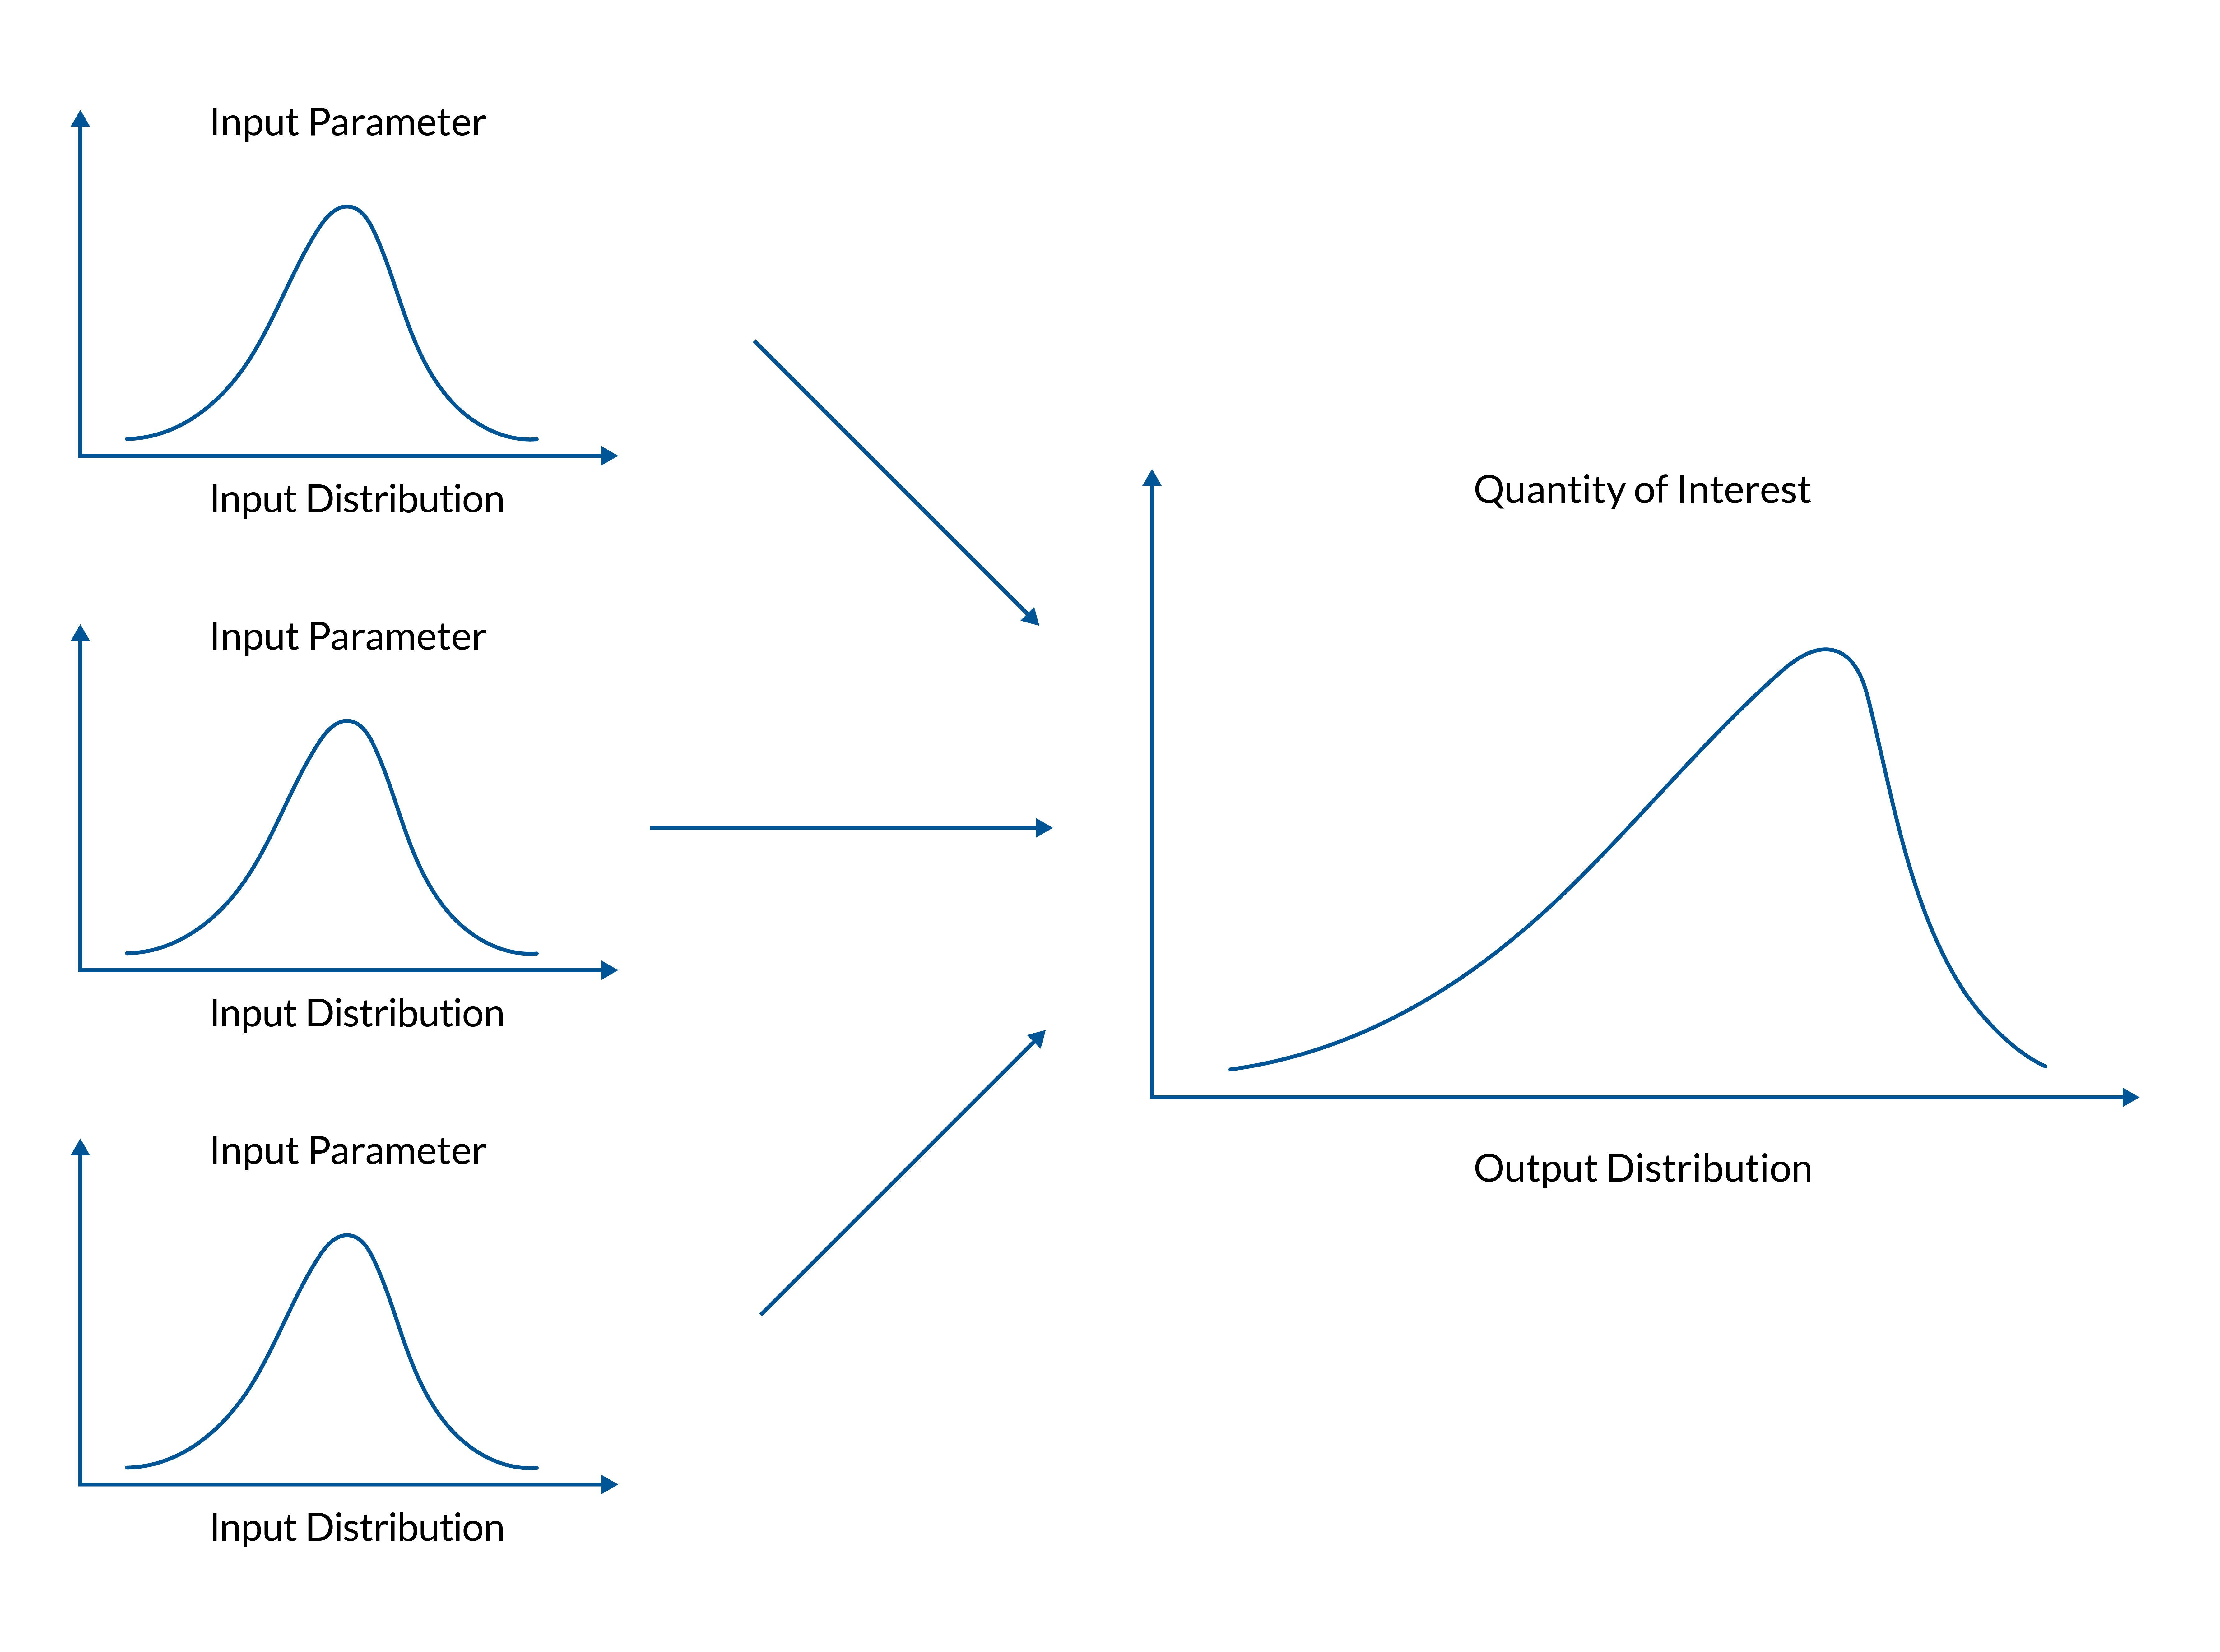 A column of three small graphs showing input parameters and their probability distributions. Each small graph points to one large graph at right showing the output distribution of a quantity of interest.